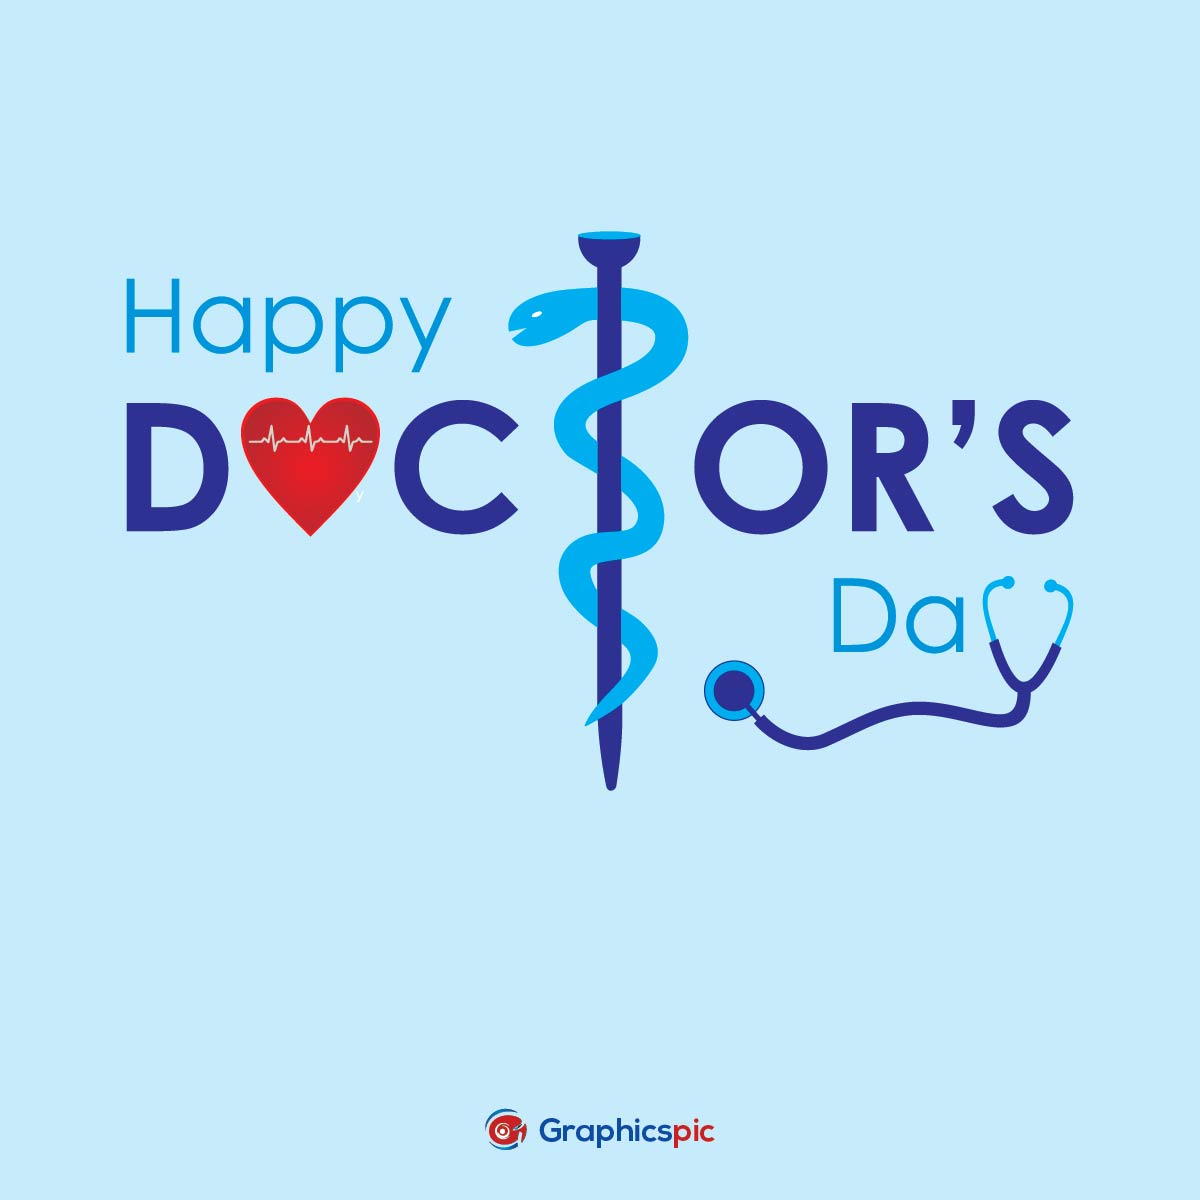 happy-doctors-day-with-medical-symbol-caduceus-with-snake-stethoscope